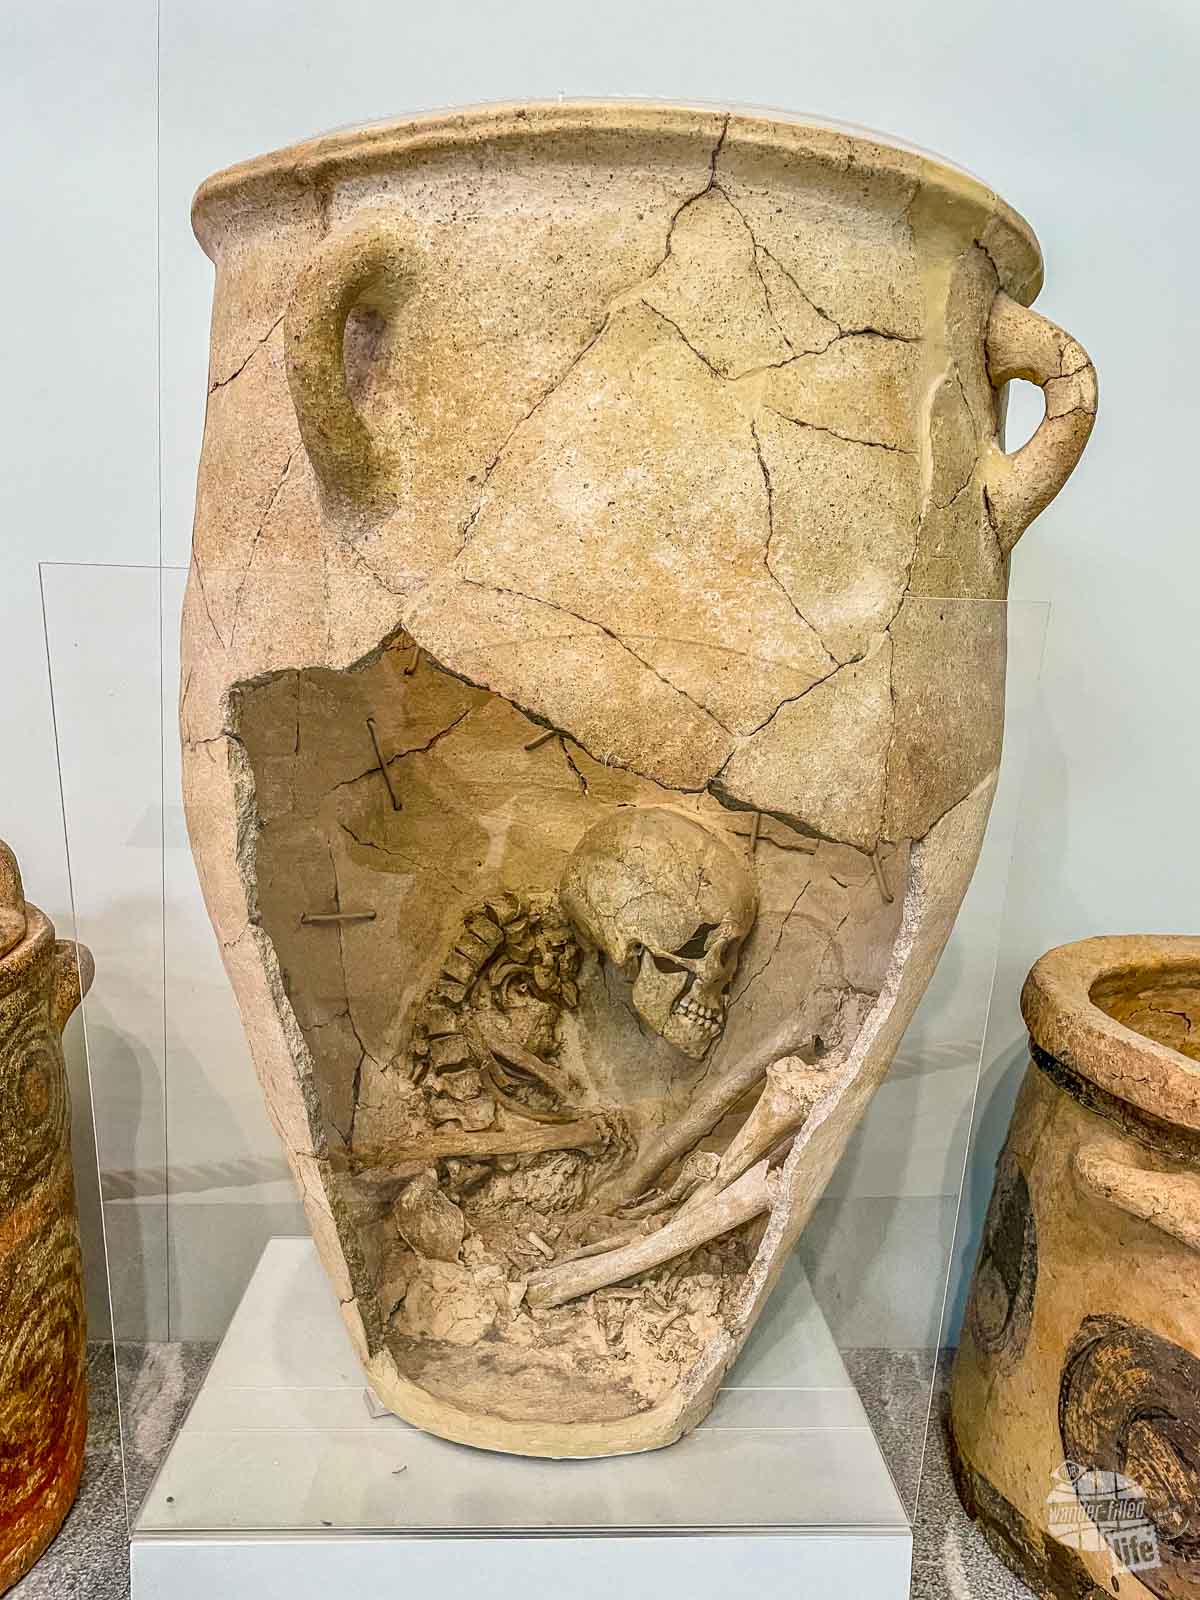 A burial pithoi at the Heraklion Archaeological Museum